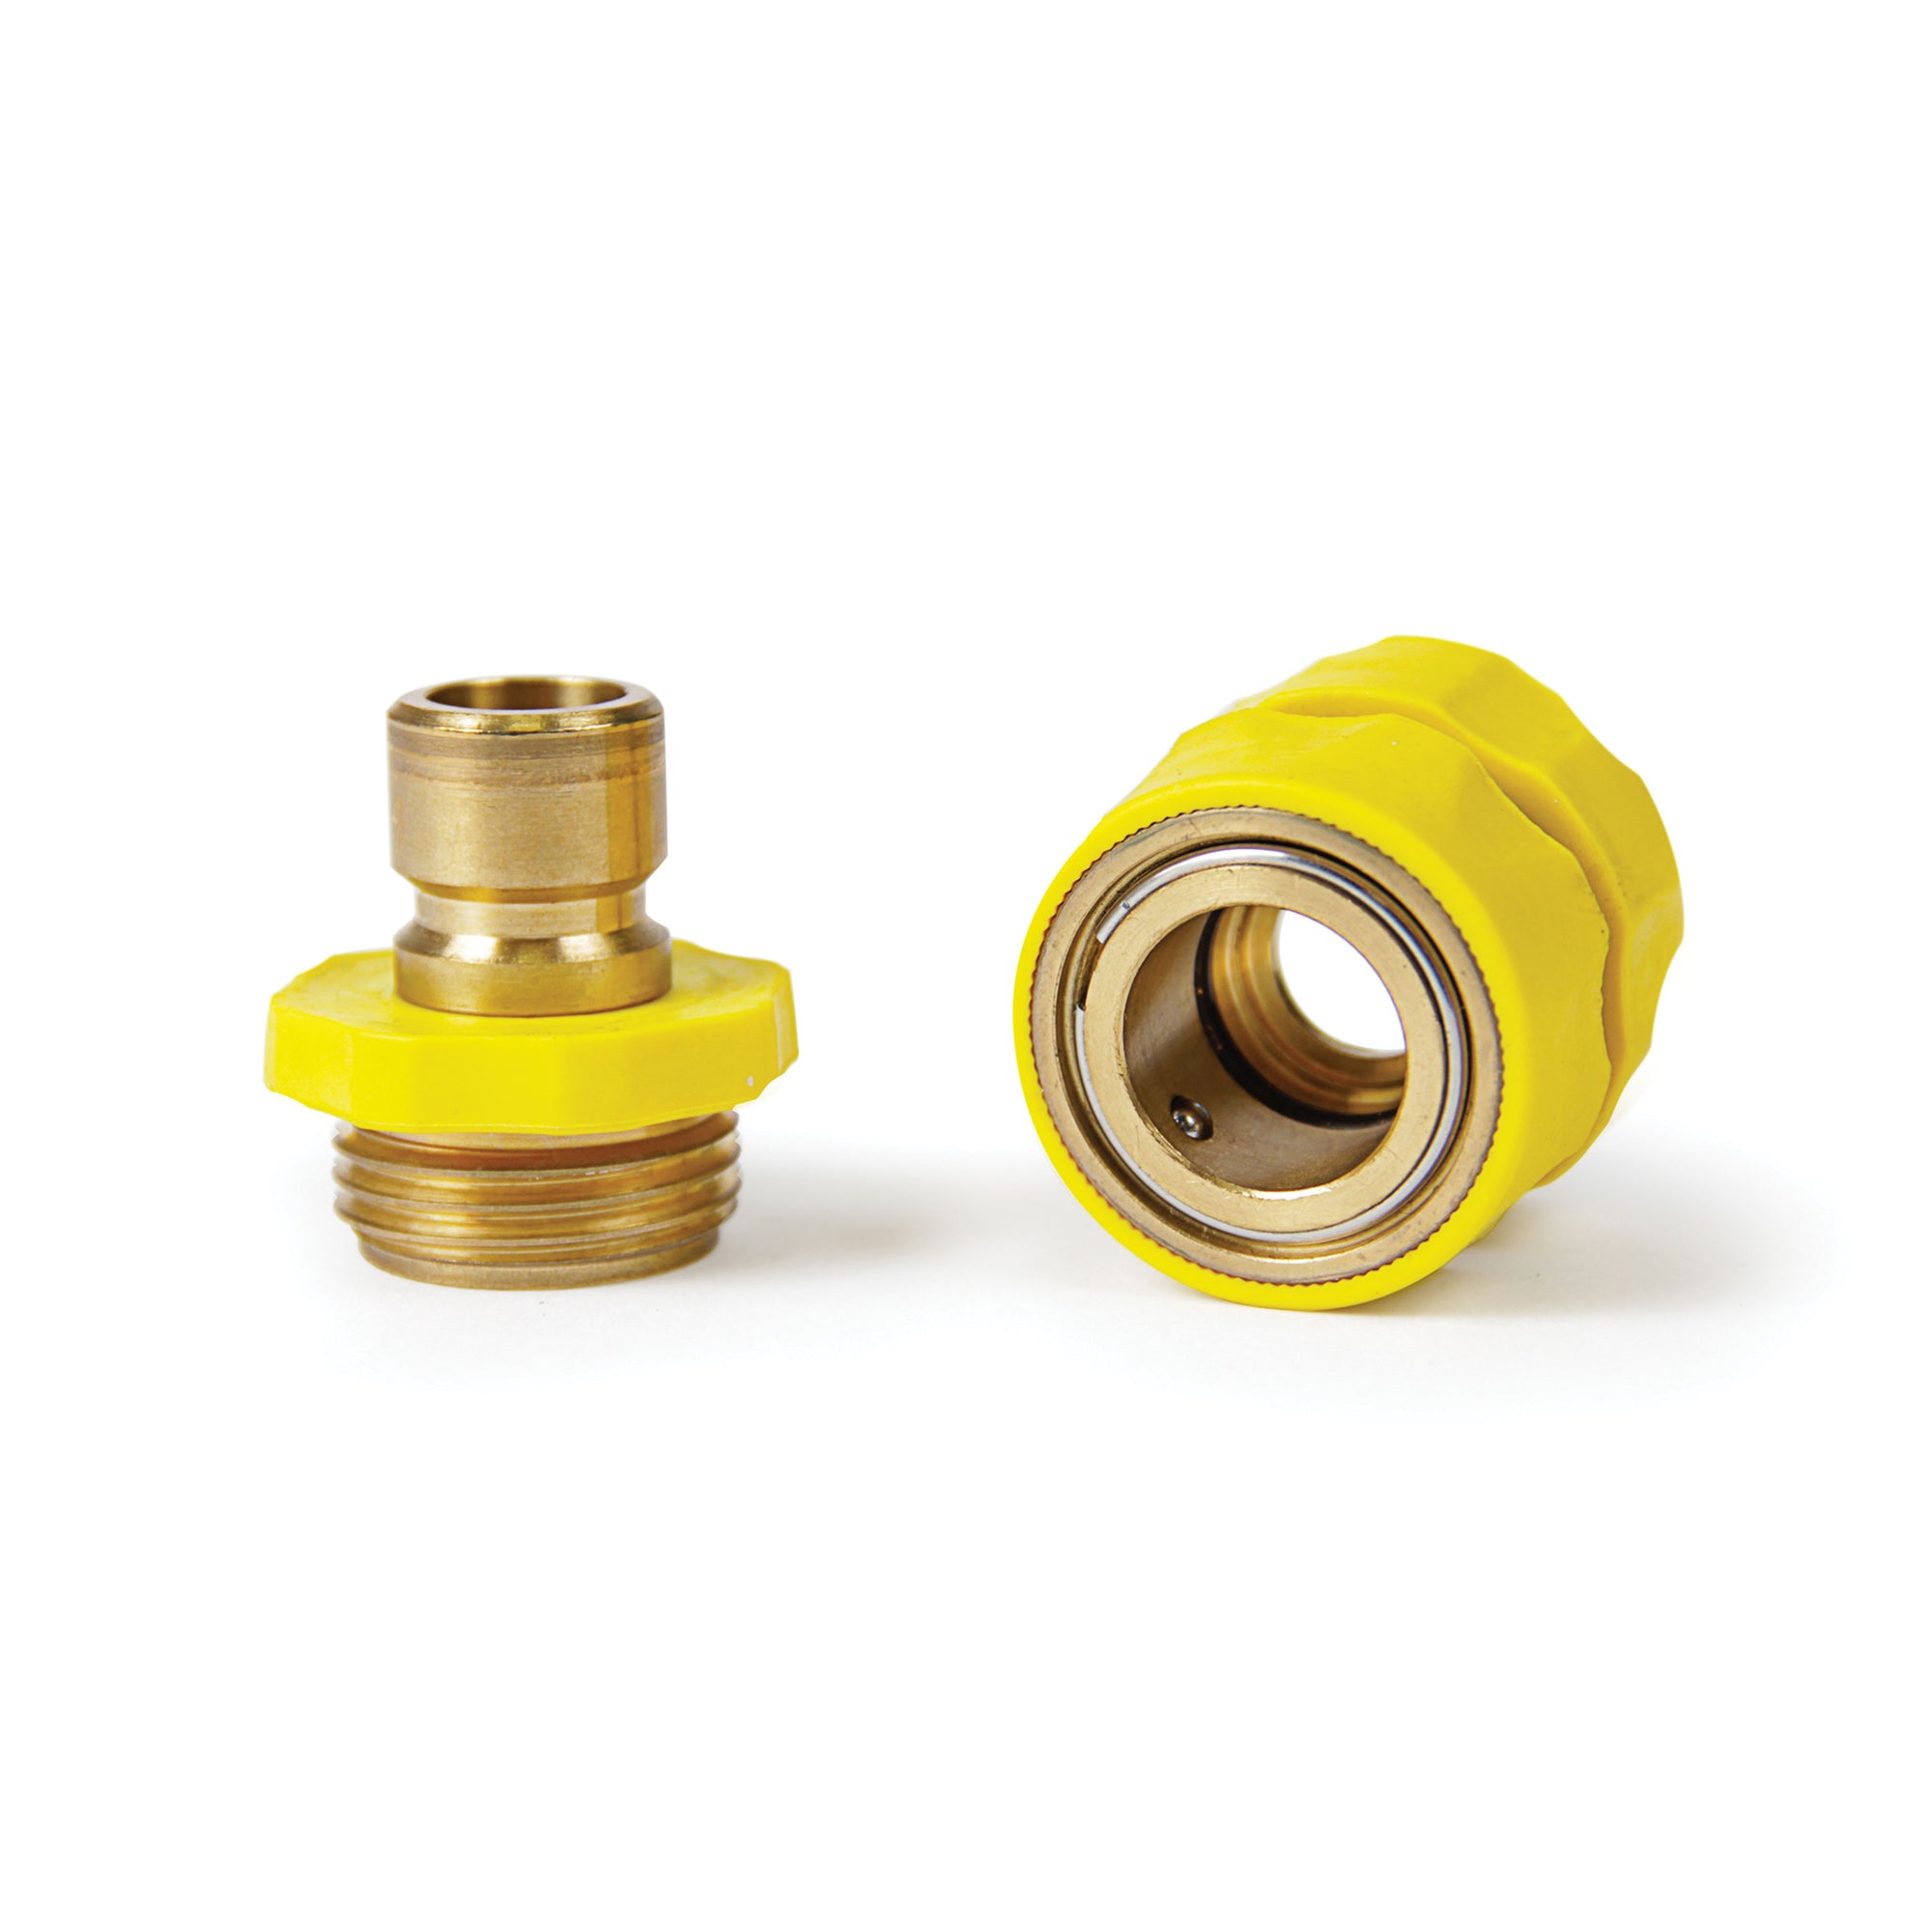 Camco 20143 Quick Hose Connect - Brass Connector With Yellow Grip